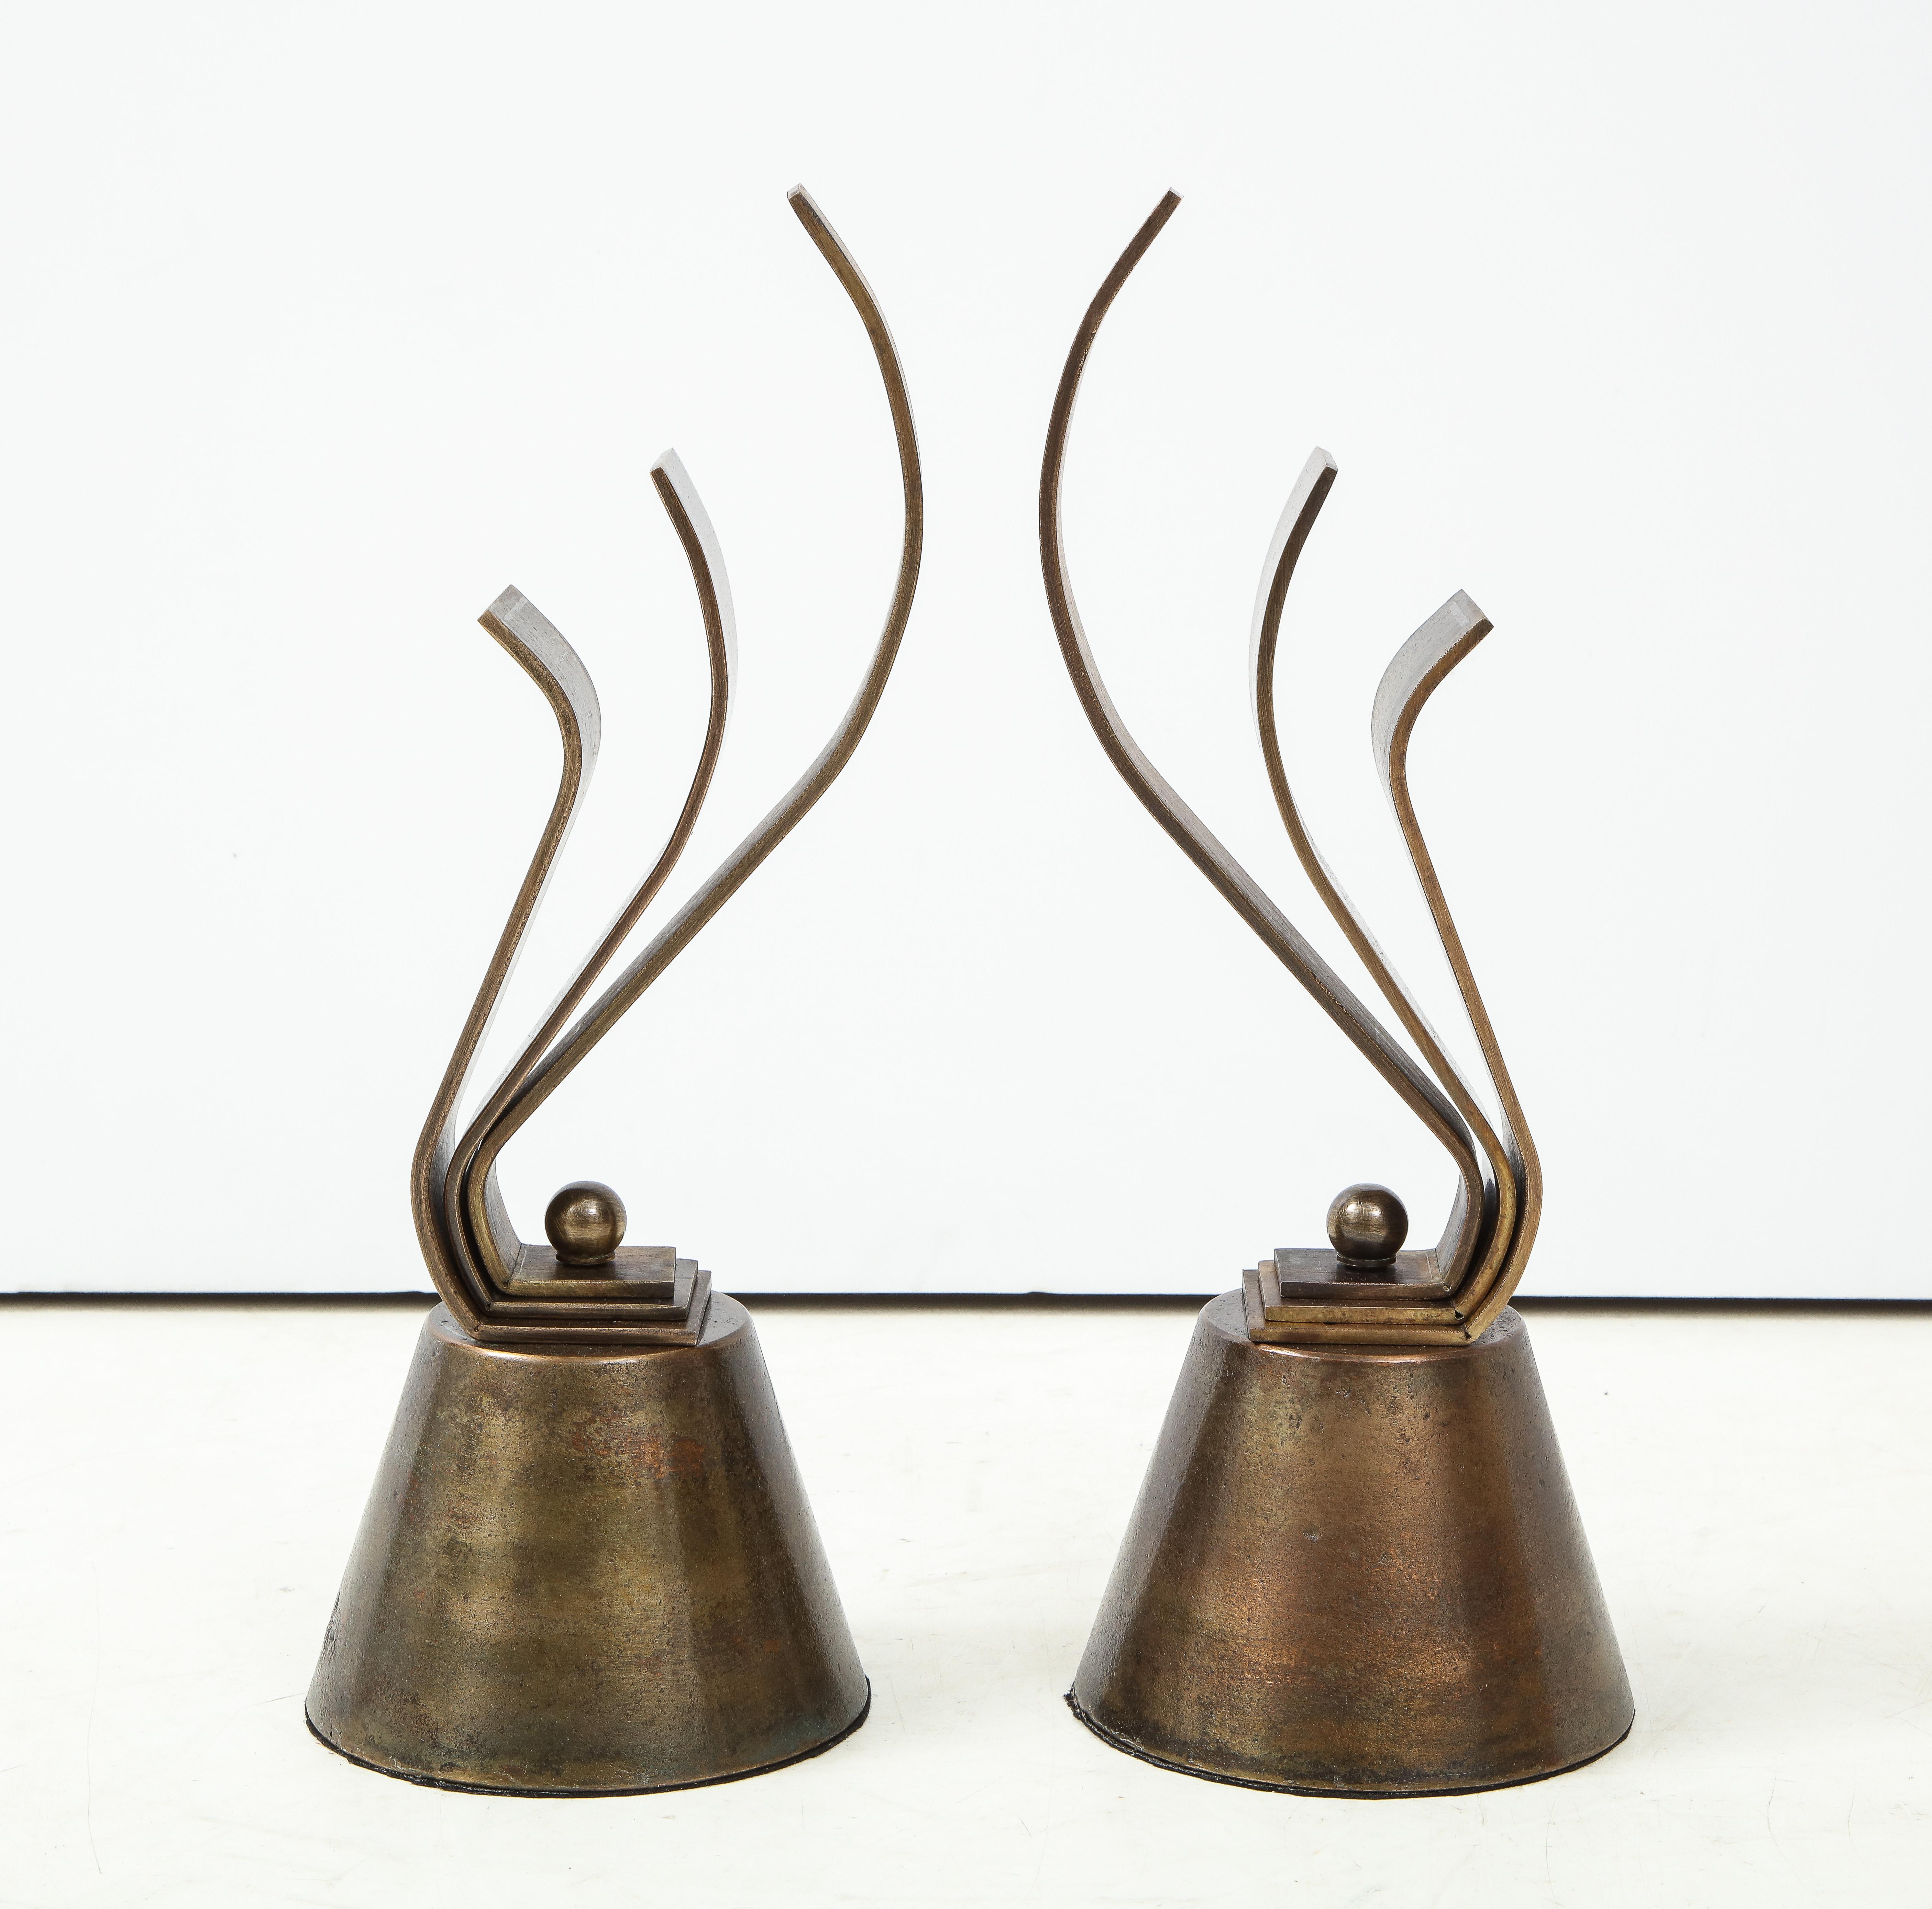 Pair of French Art Deco decorative aged bronze chenets, circa 1940s.